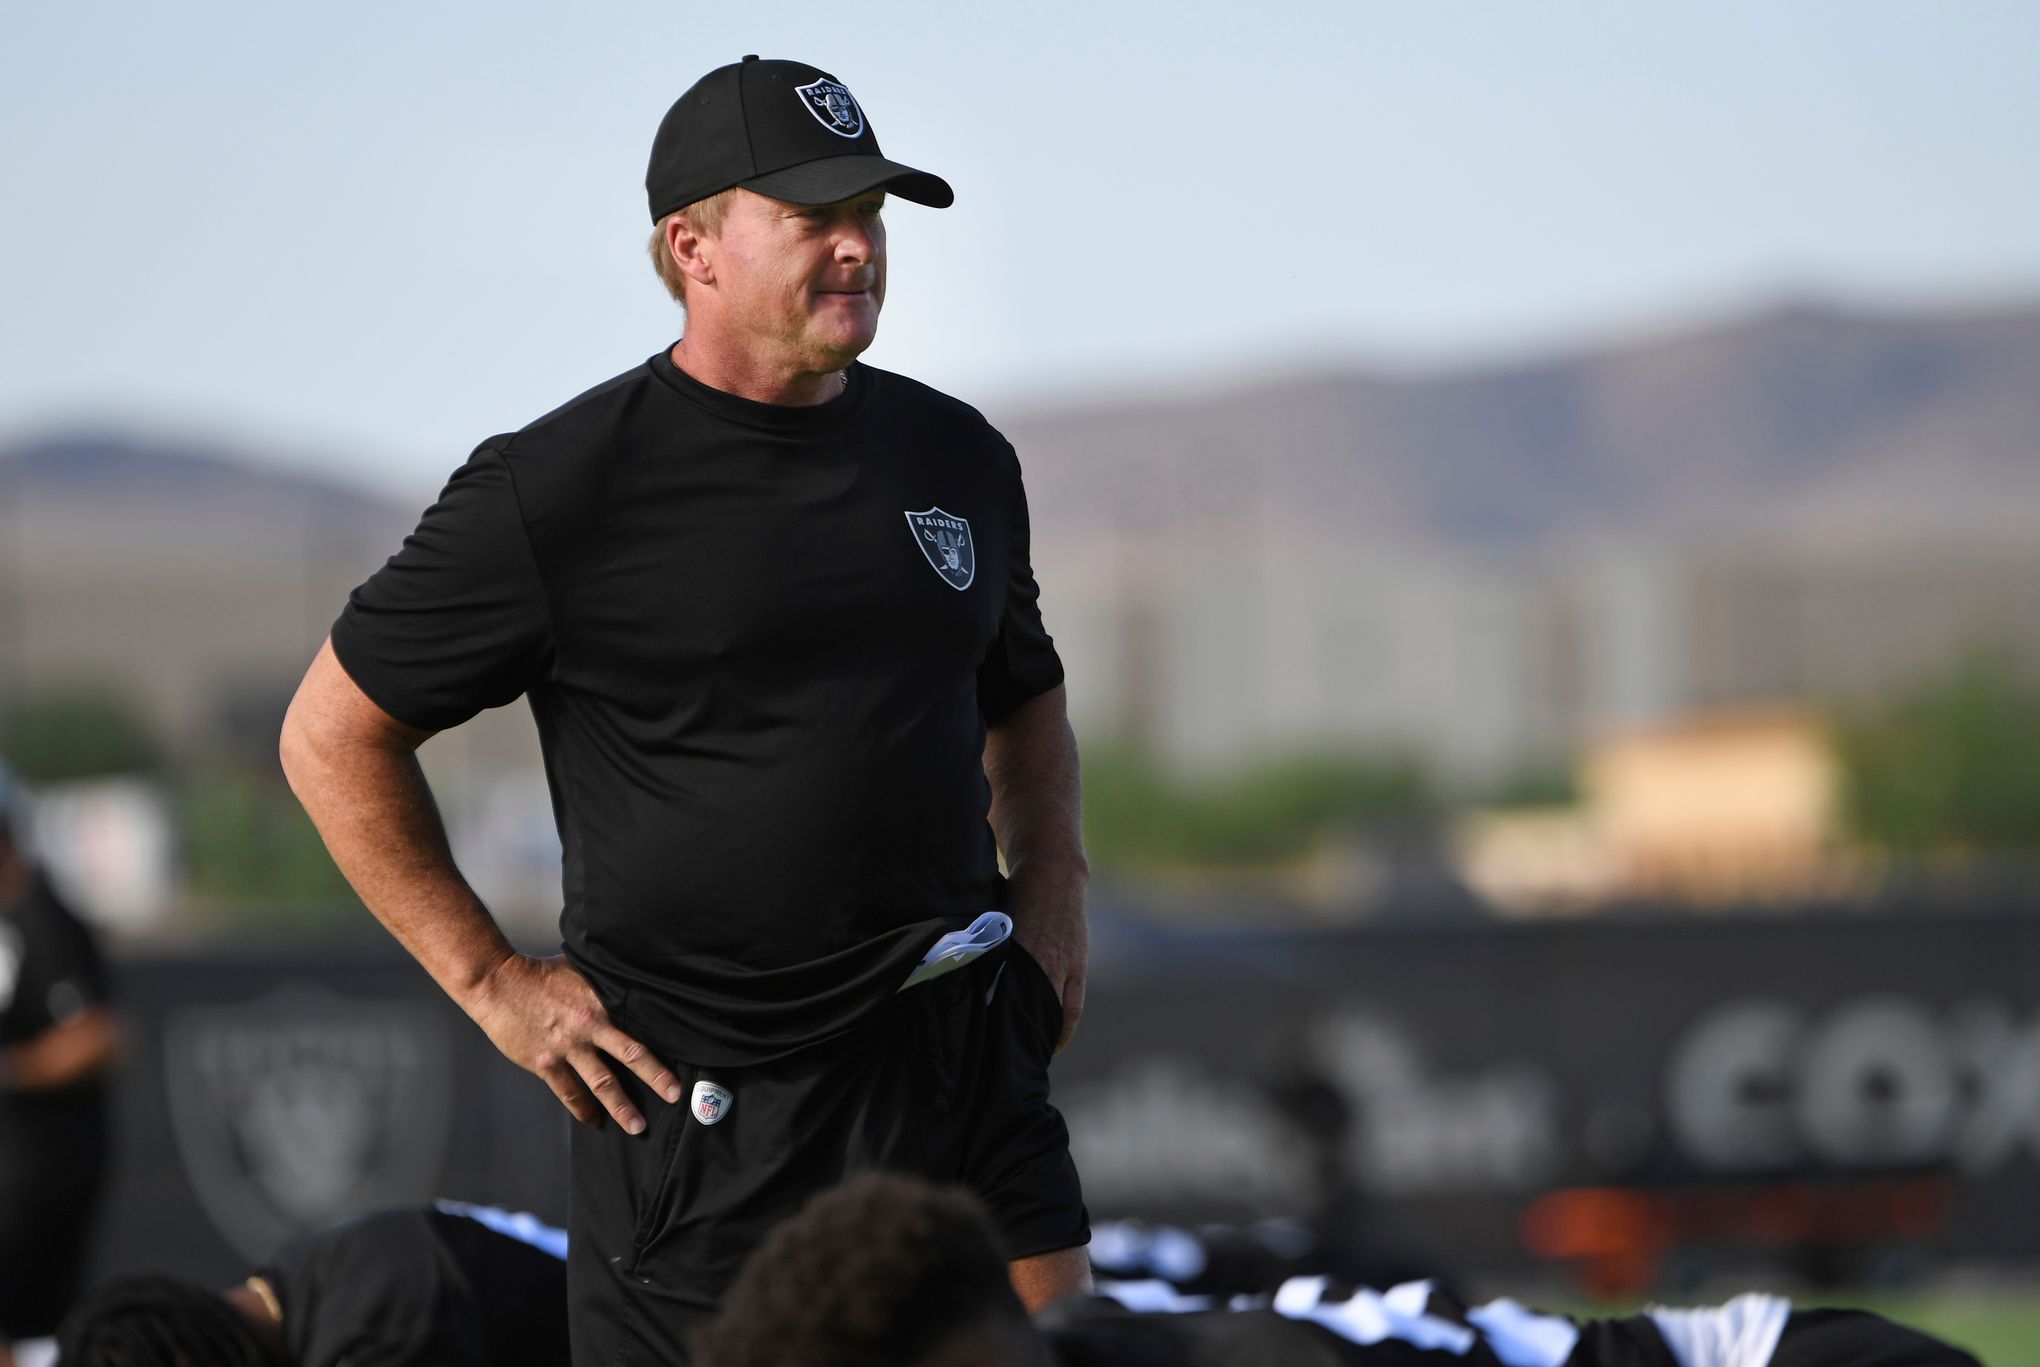 Las Vegas Raiders will require all fans to get vaccinated if they want to  attend 2021 games